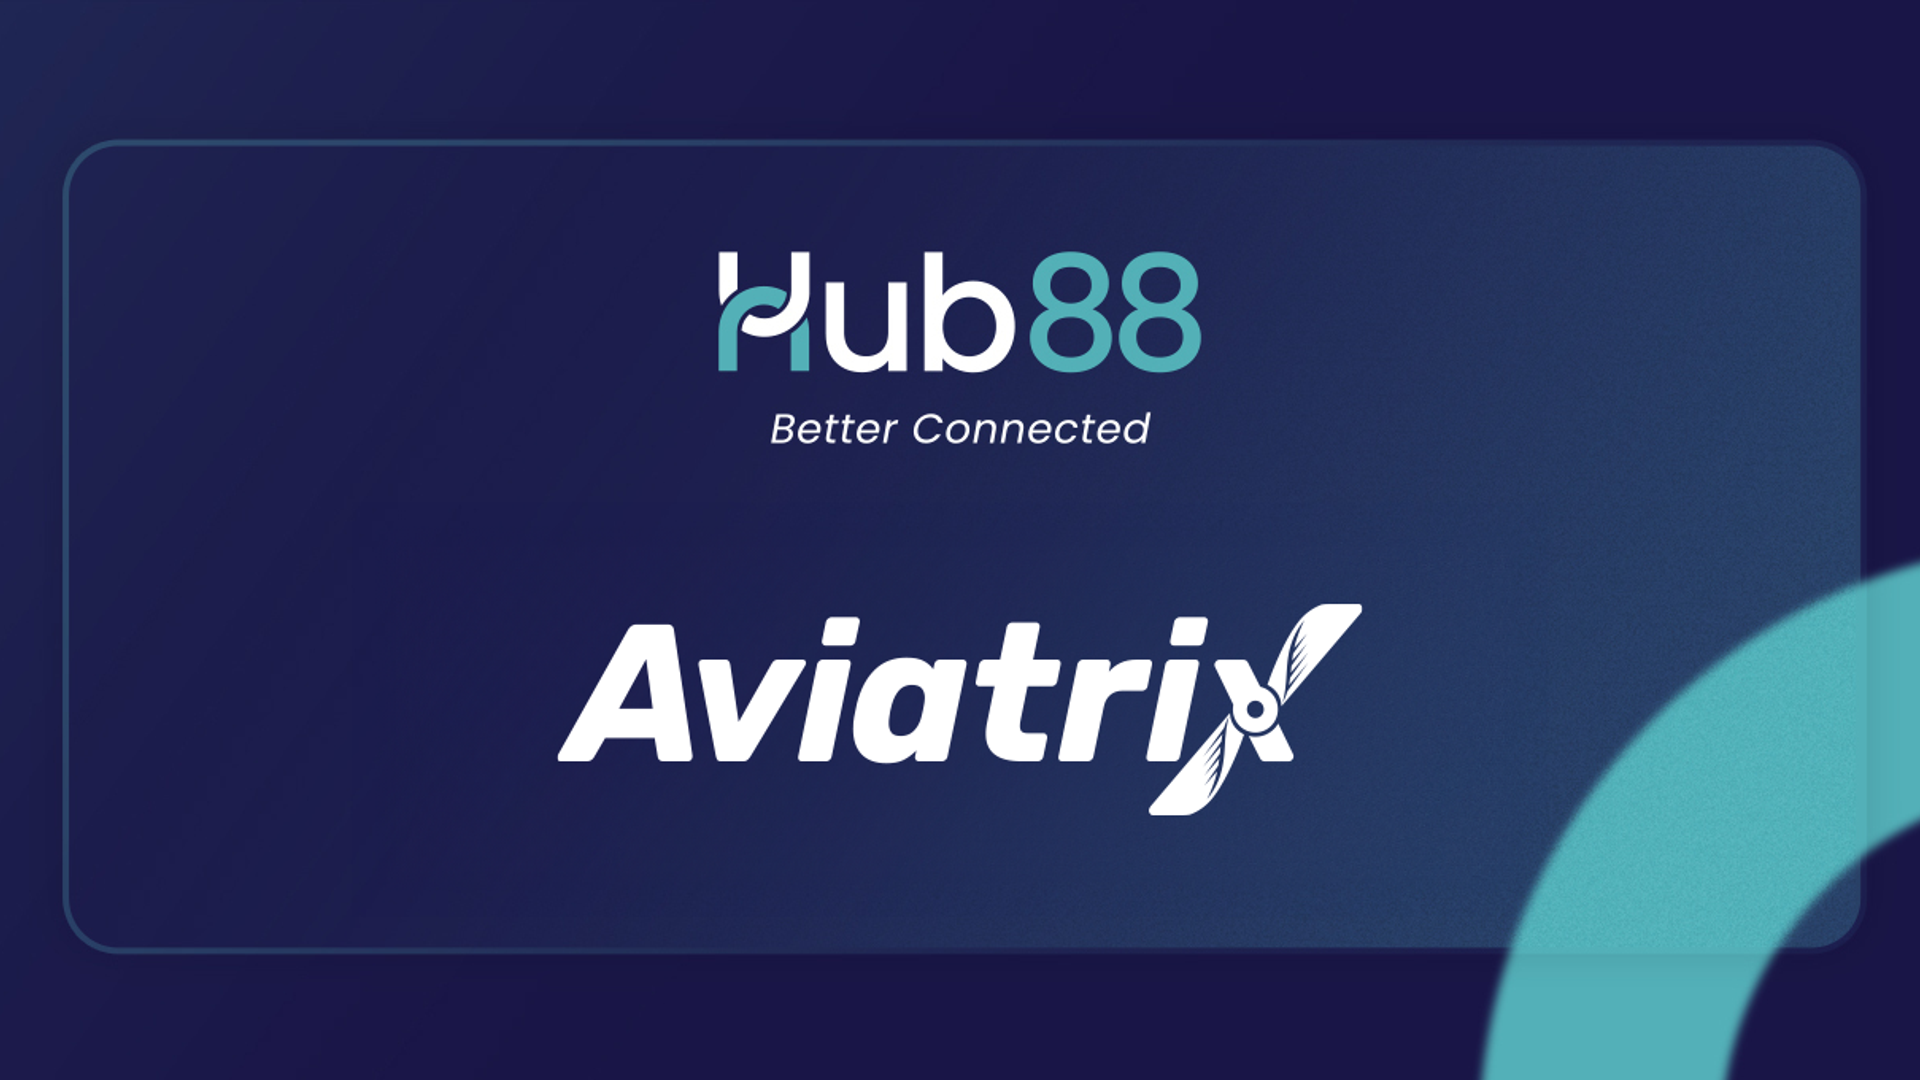 Cover Image for Crash game provider Aviatrix selects Hub88 to boost global reach